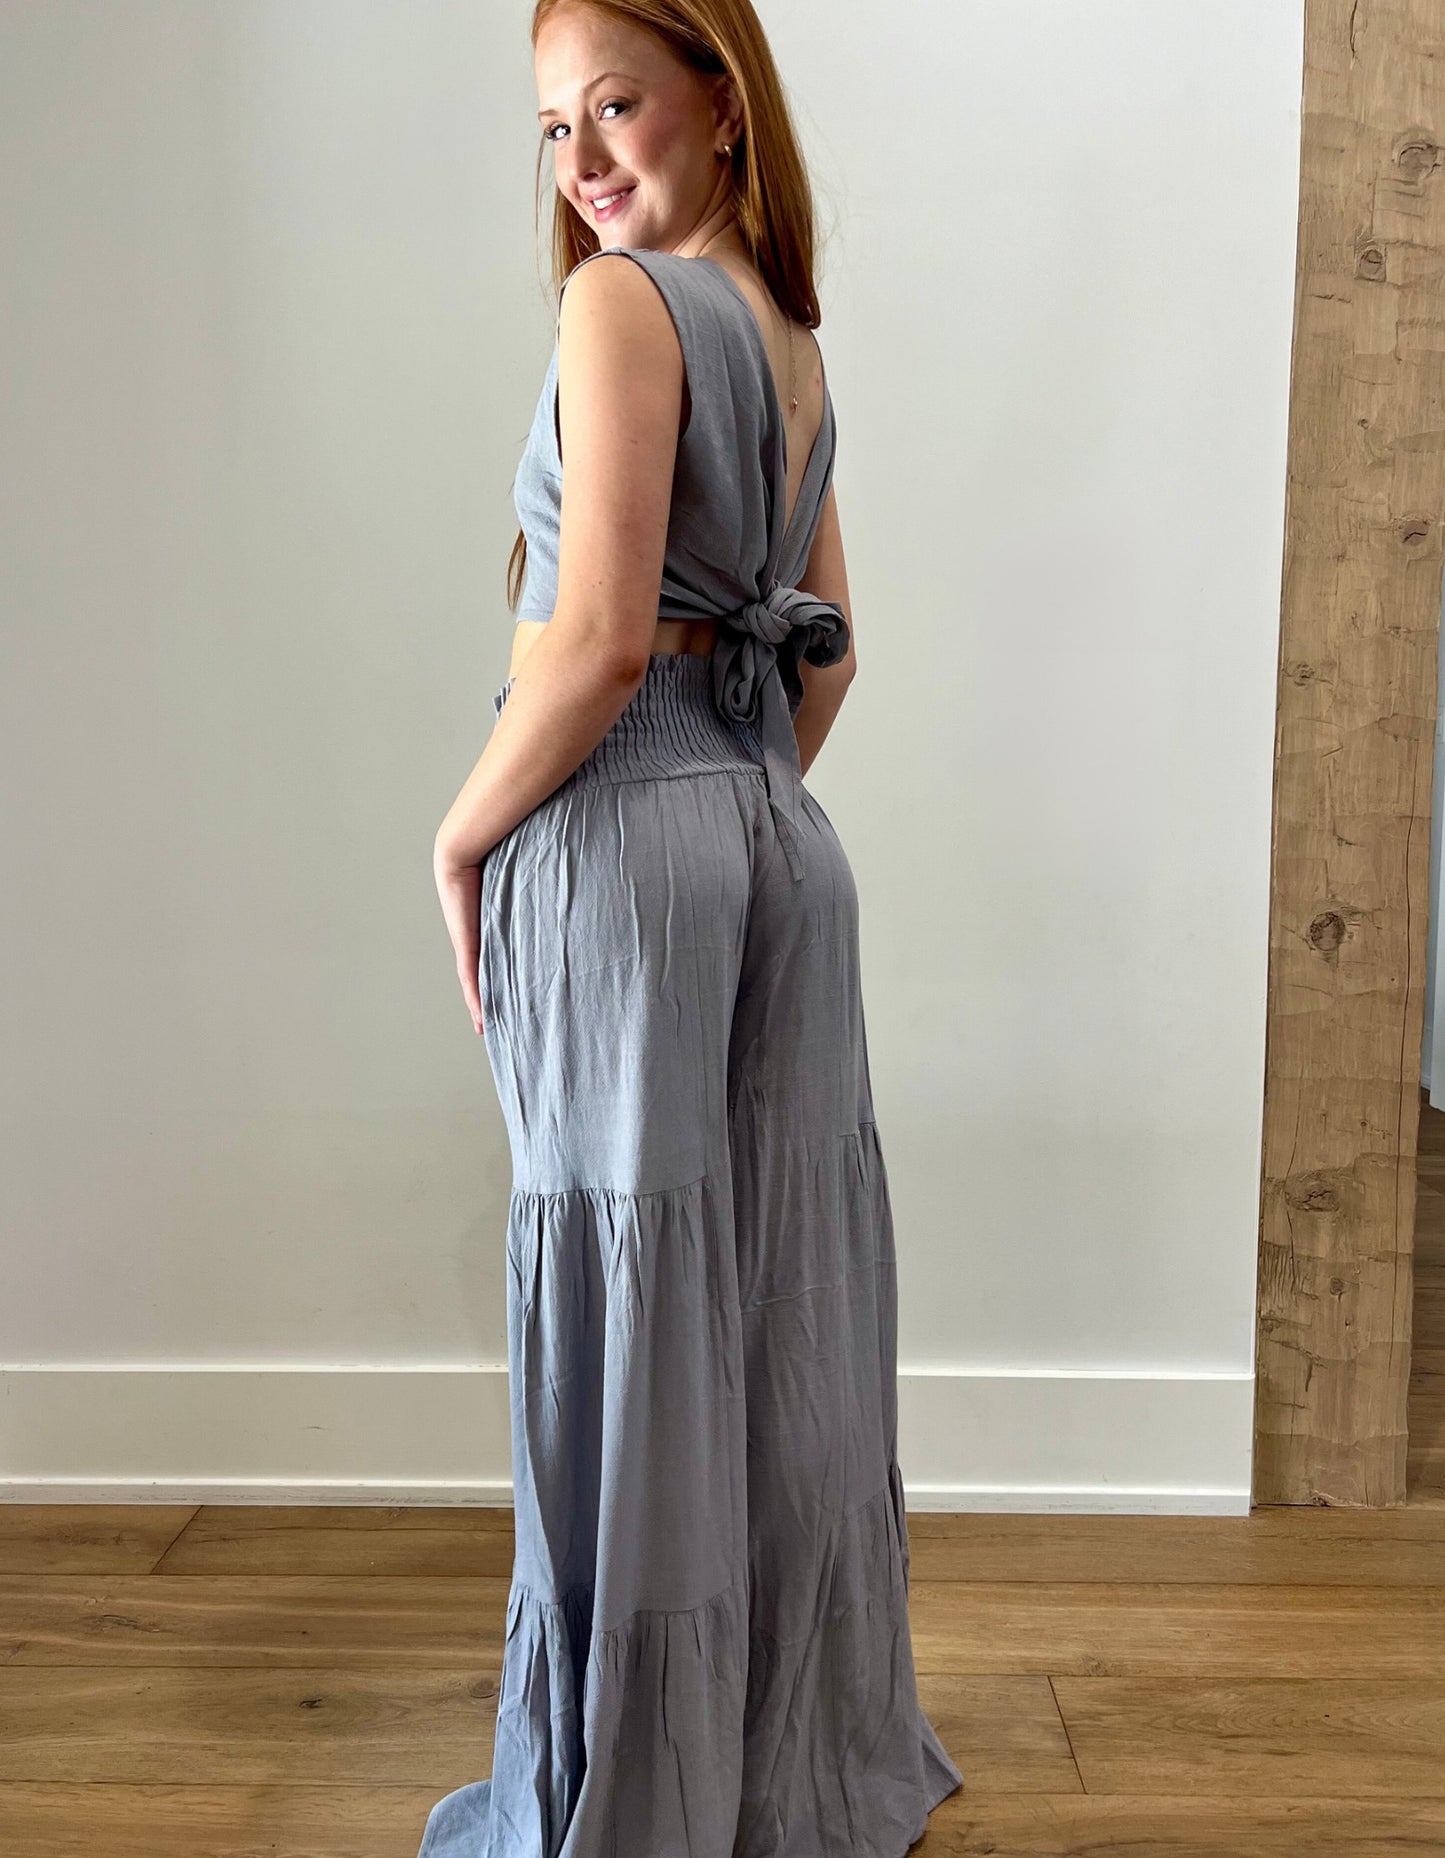 Gray sleeveless top with flowy pants, back view